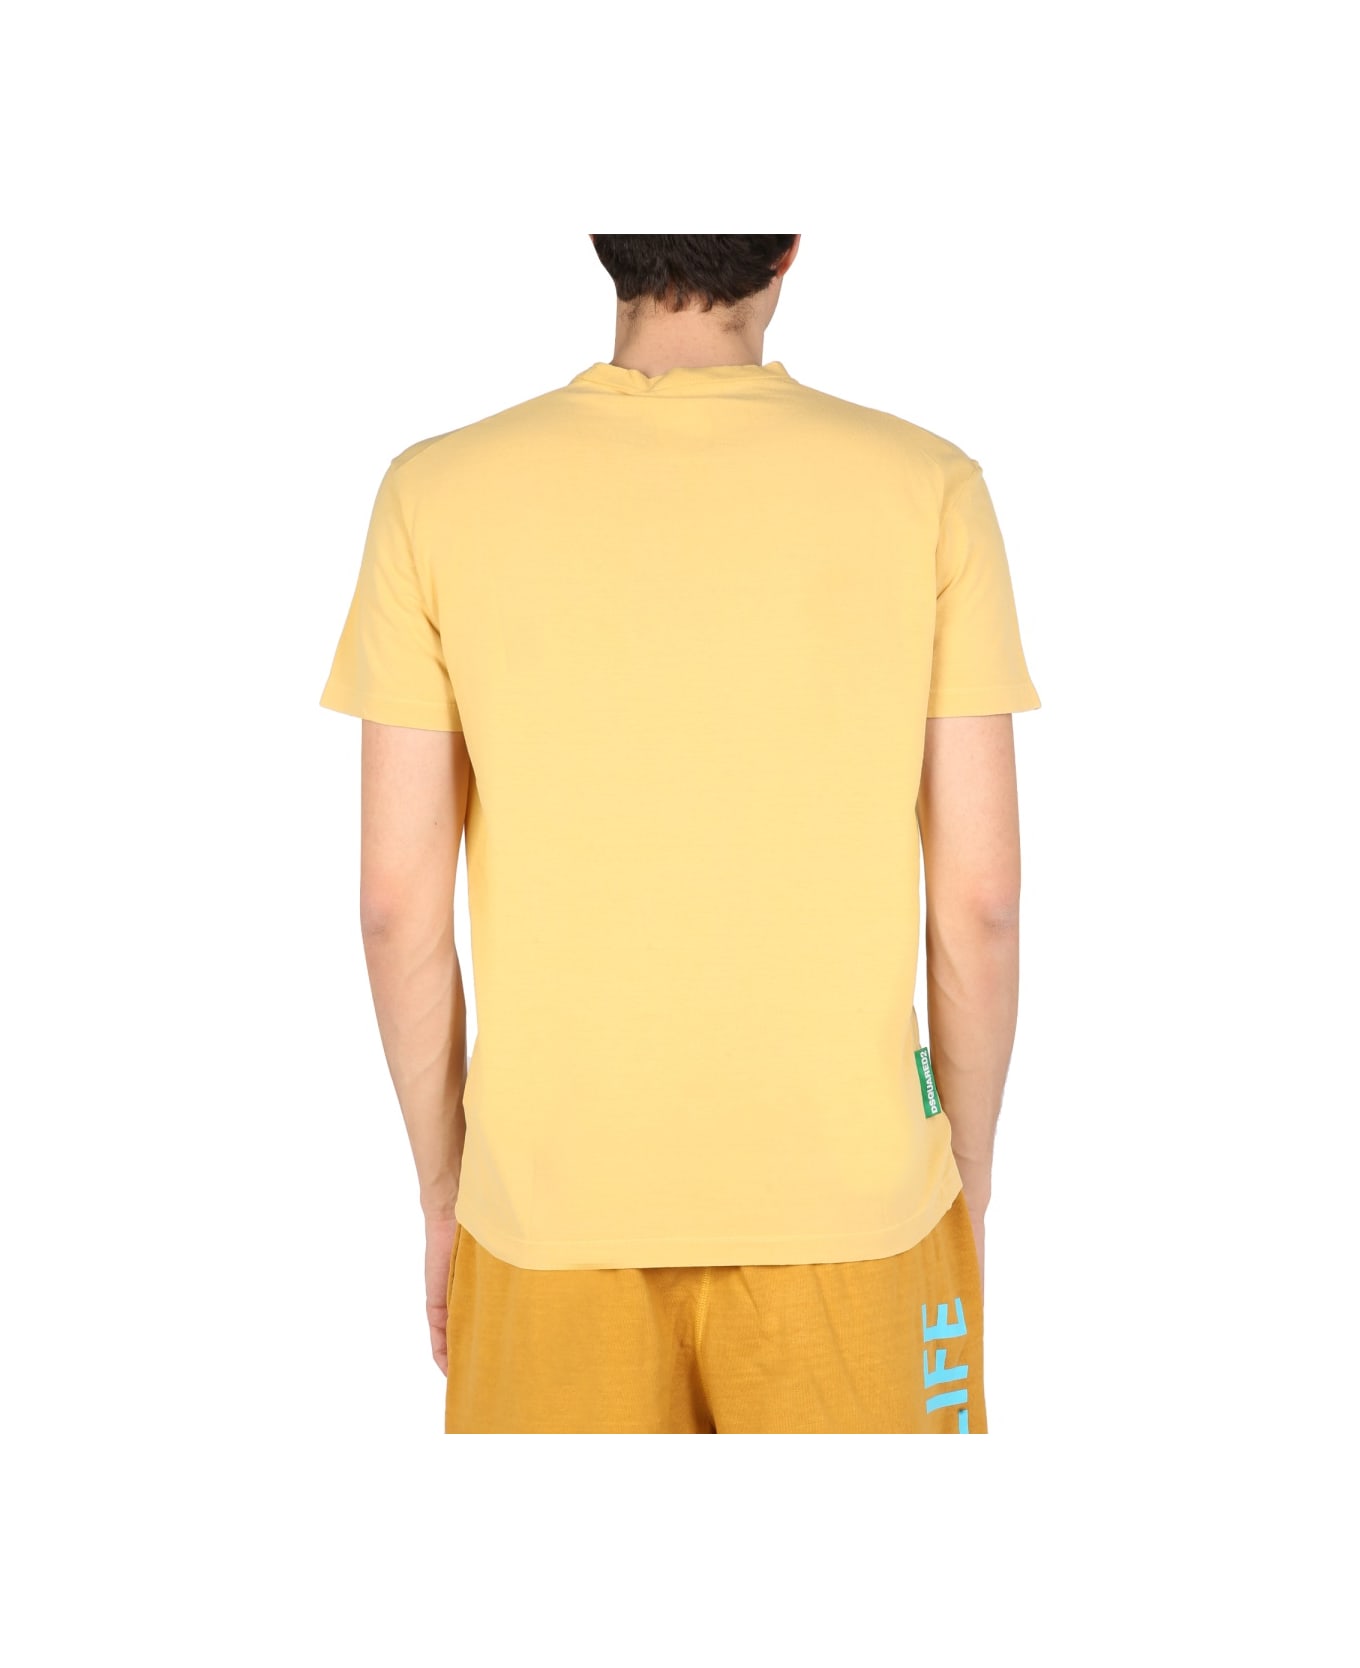 Dsquared2 "one Life One Planet" T-shirt - YELLOW シャツ